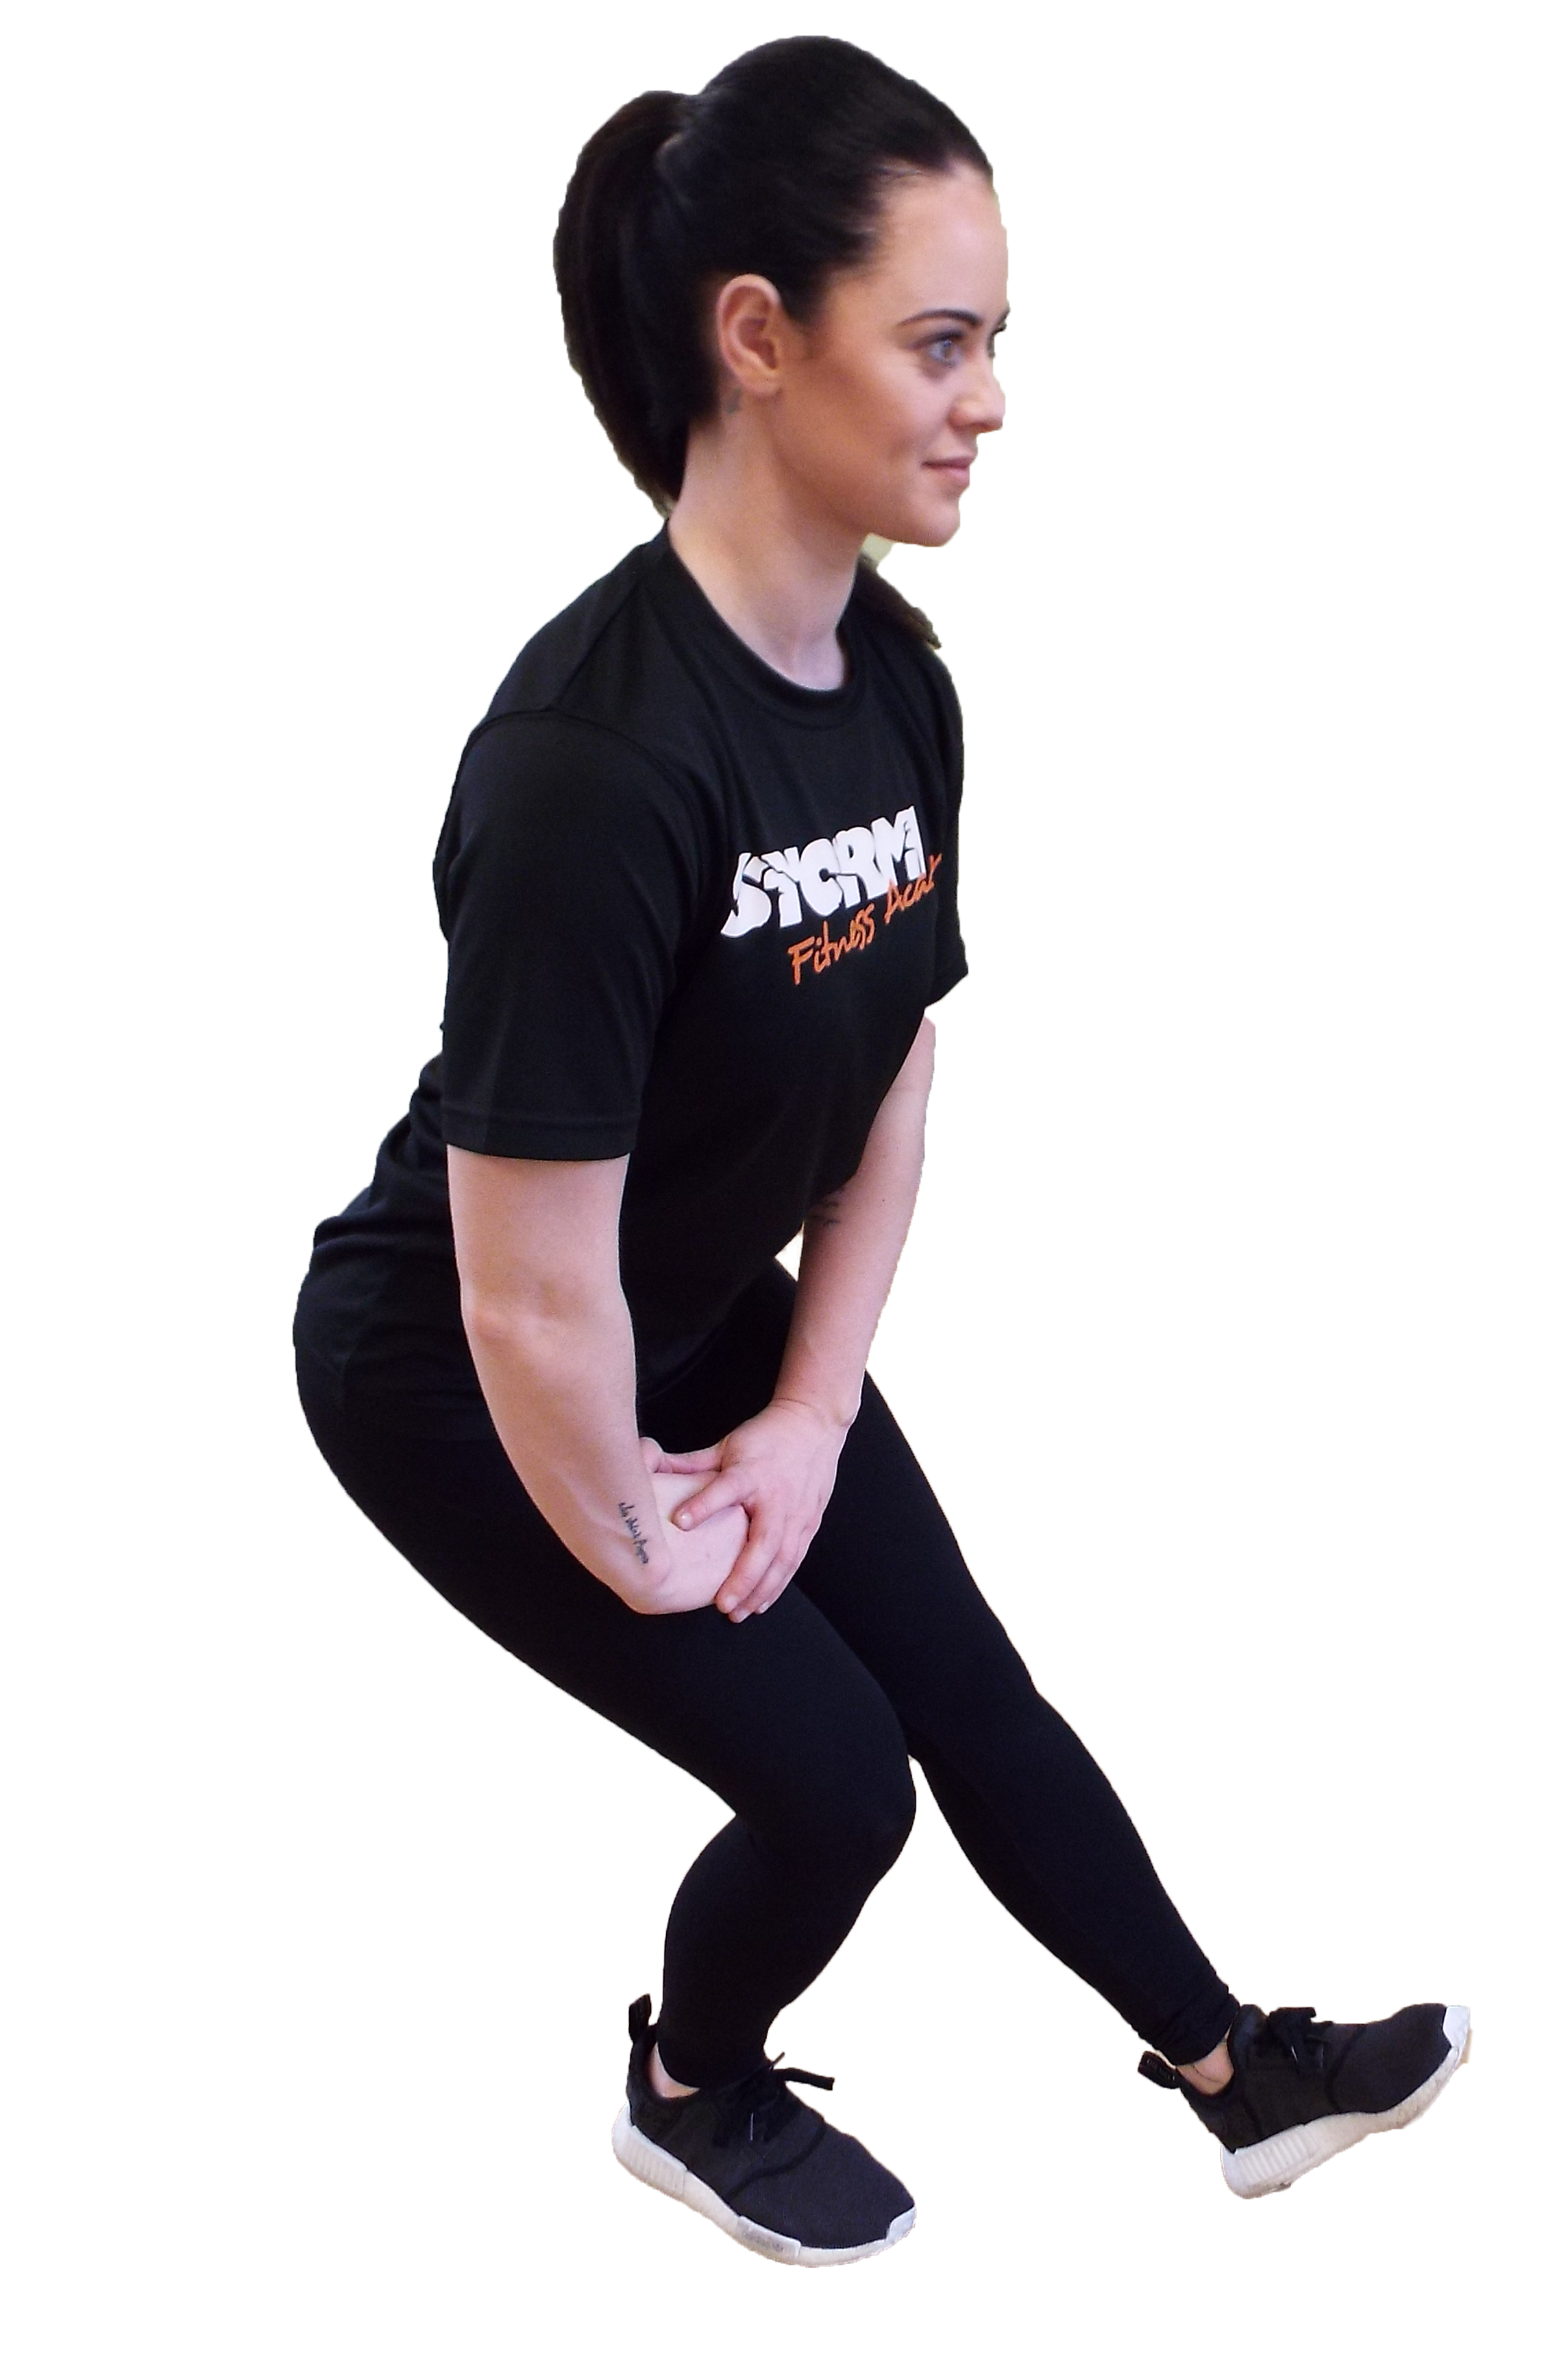 Stretch routine - Standing hamstring